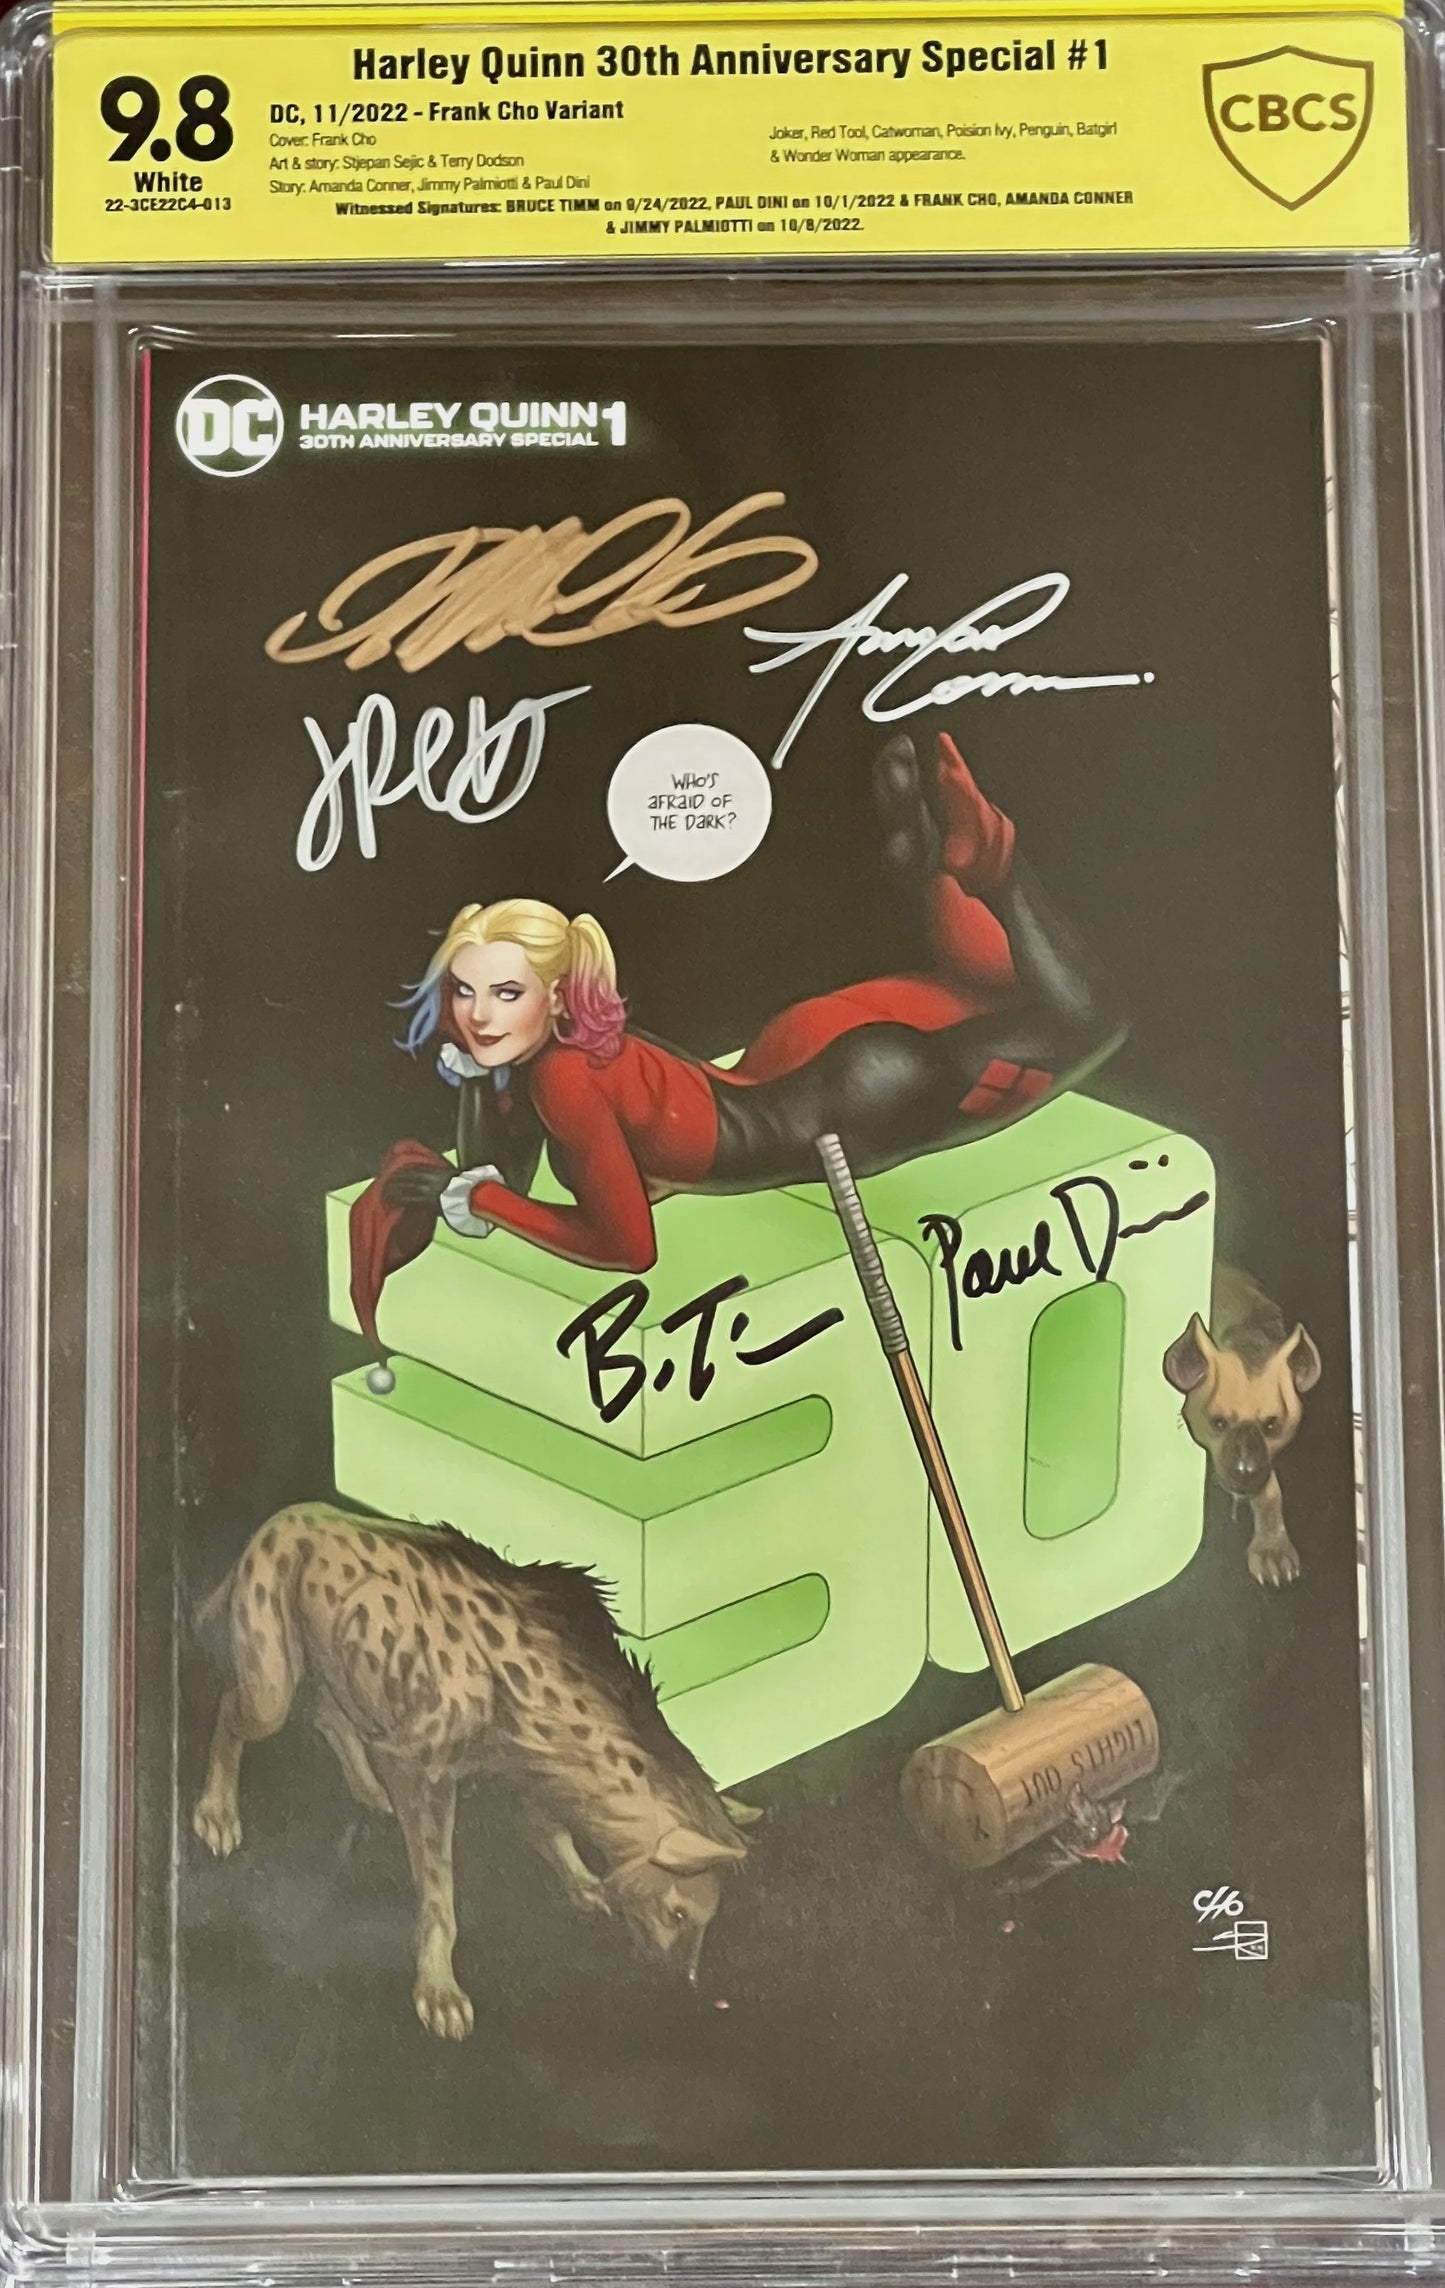 Harley Quinn 30th Anniversary Special. Frank Cho Variant. Signed. CBCS 9.8.